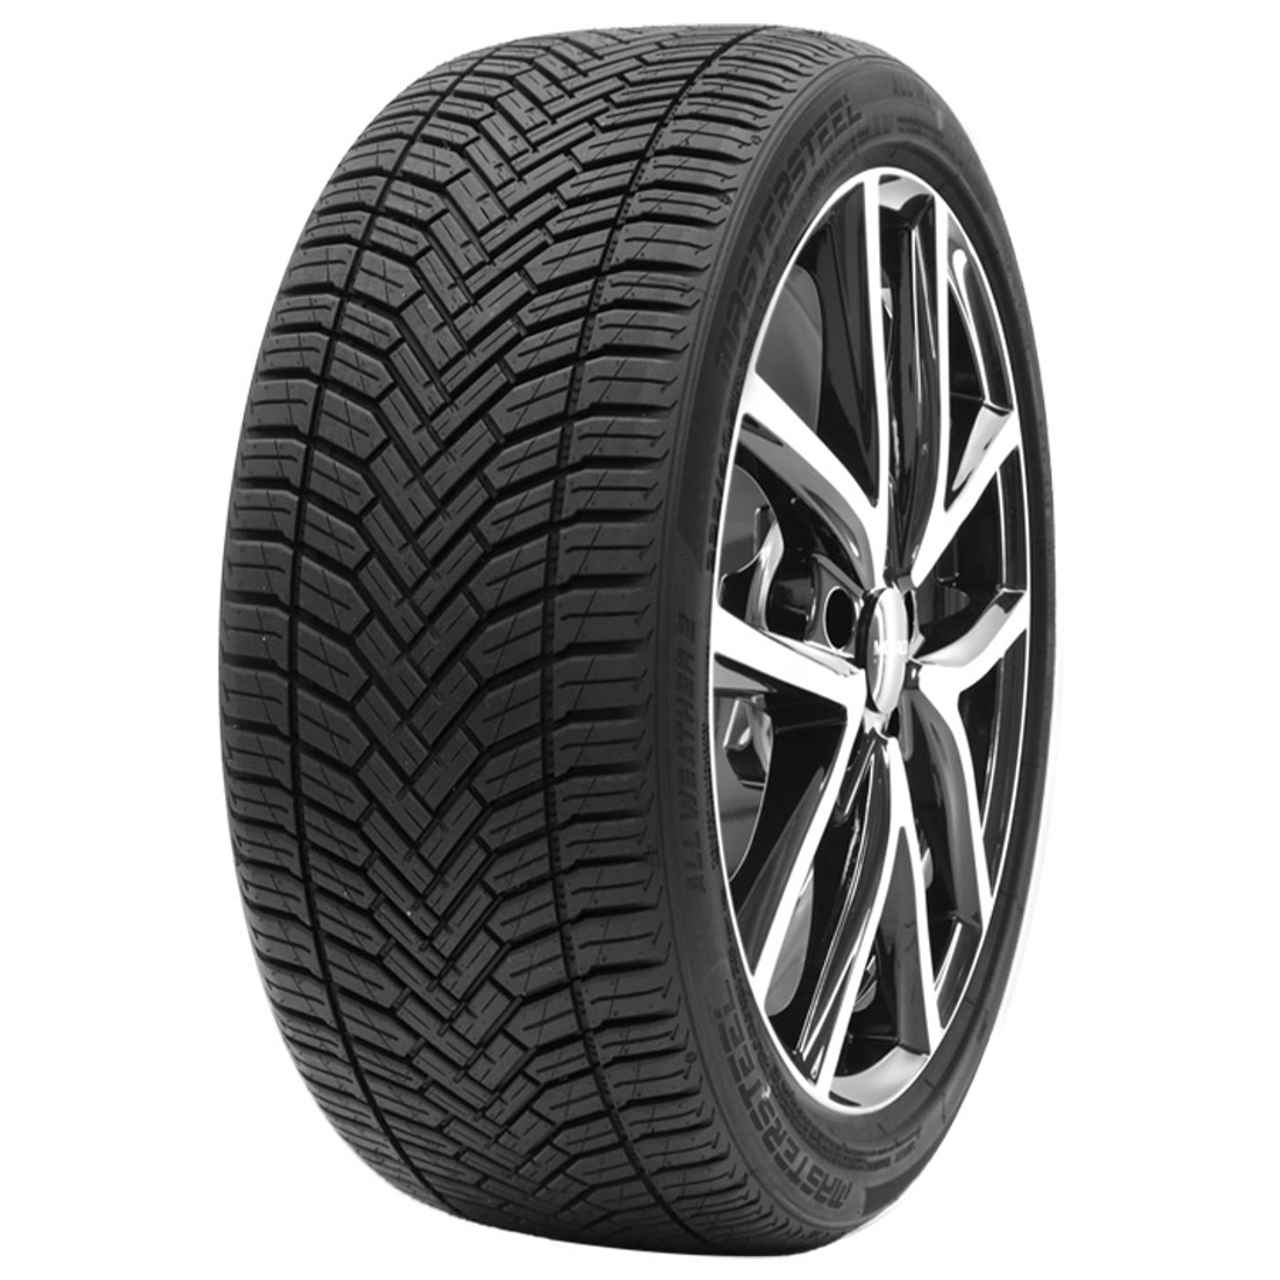 MASTERSTEEL ALL WEATHER 2 195/65R15 91H BSW